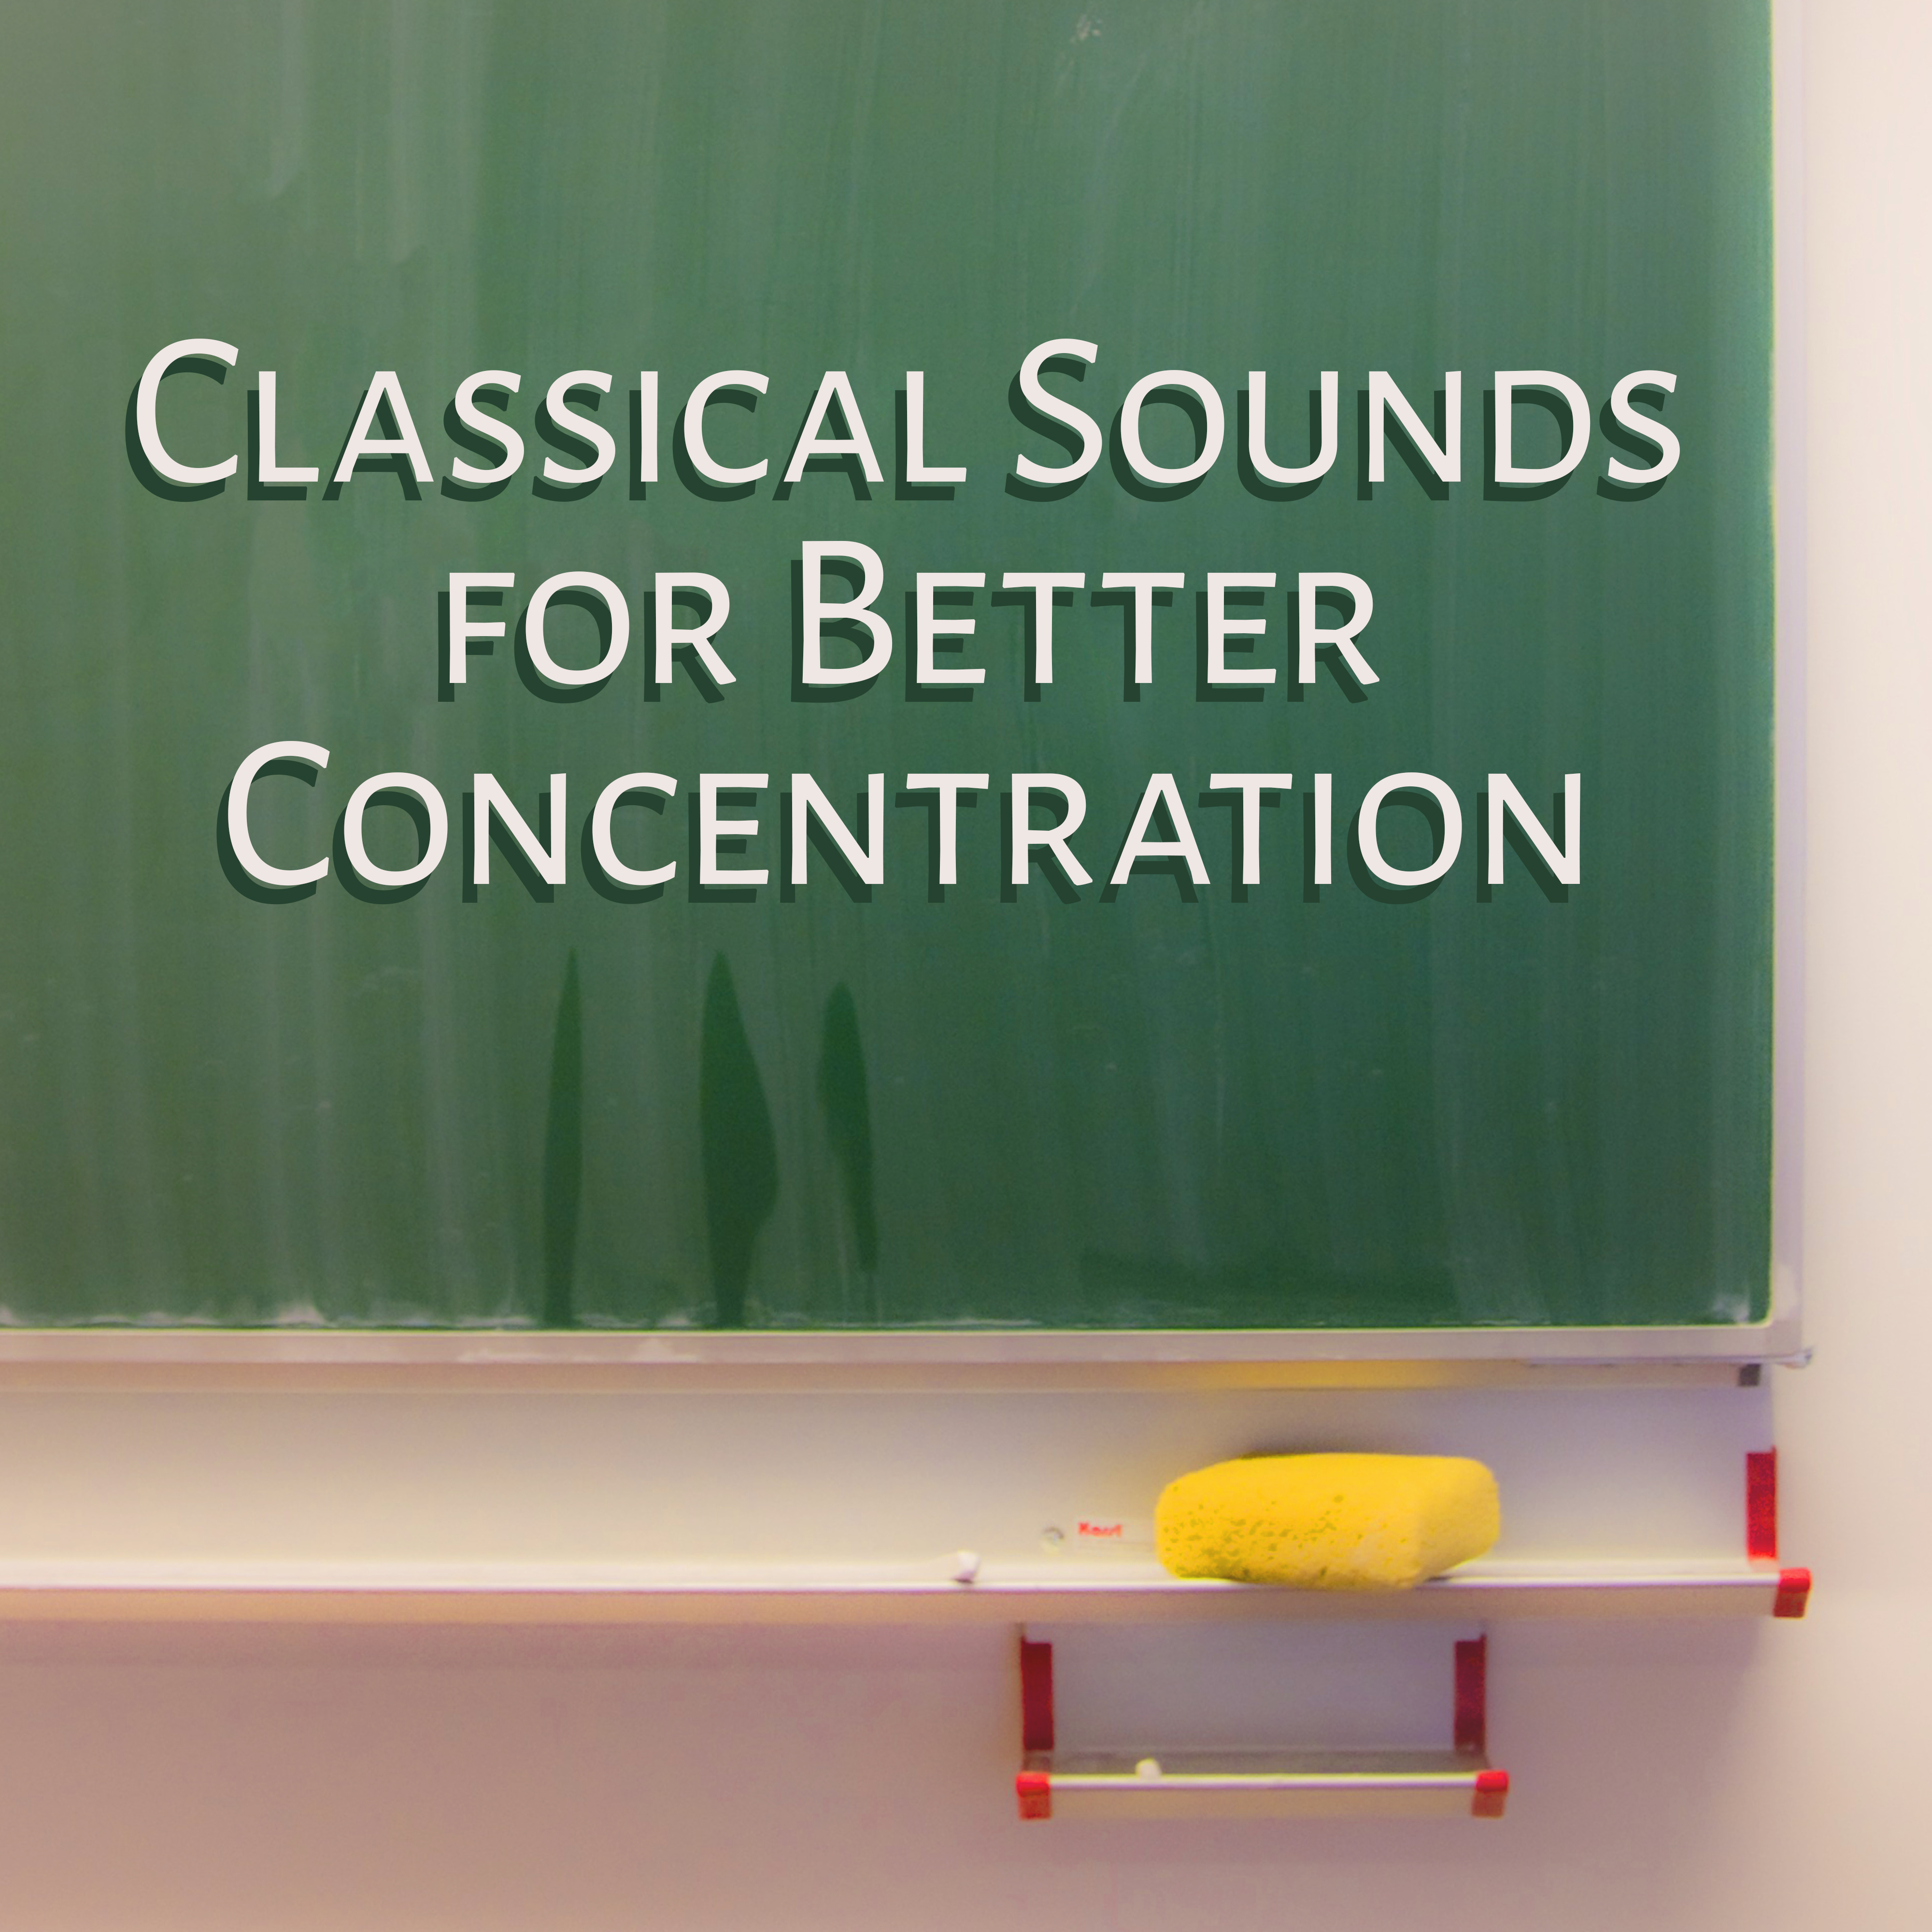 Classical Sounds for Better Concentration – Soothing Classics Music, Rest with Beautiful Melodies, Sounds to Focus, Study Time